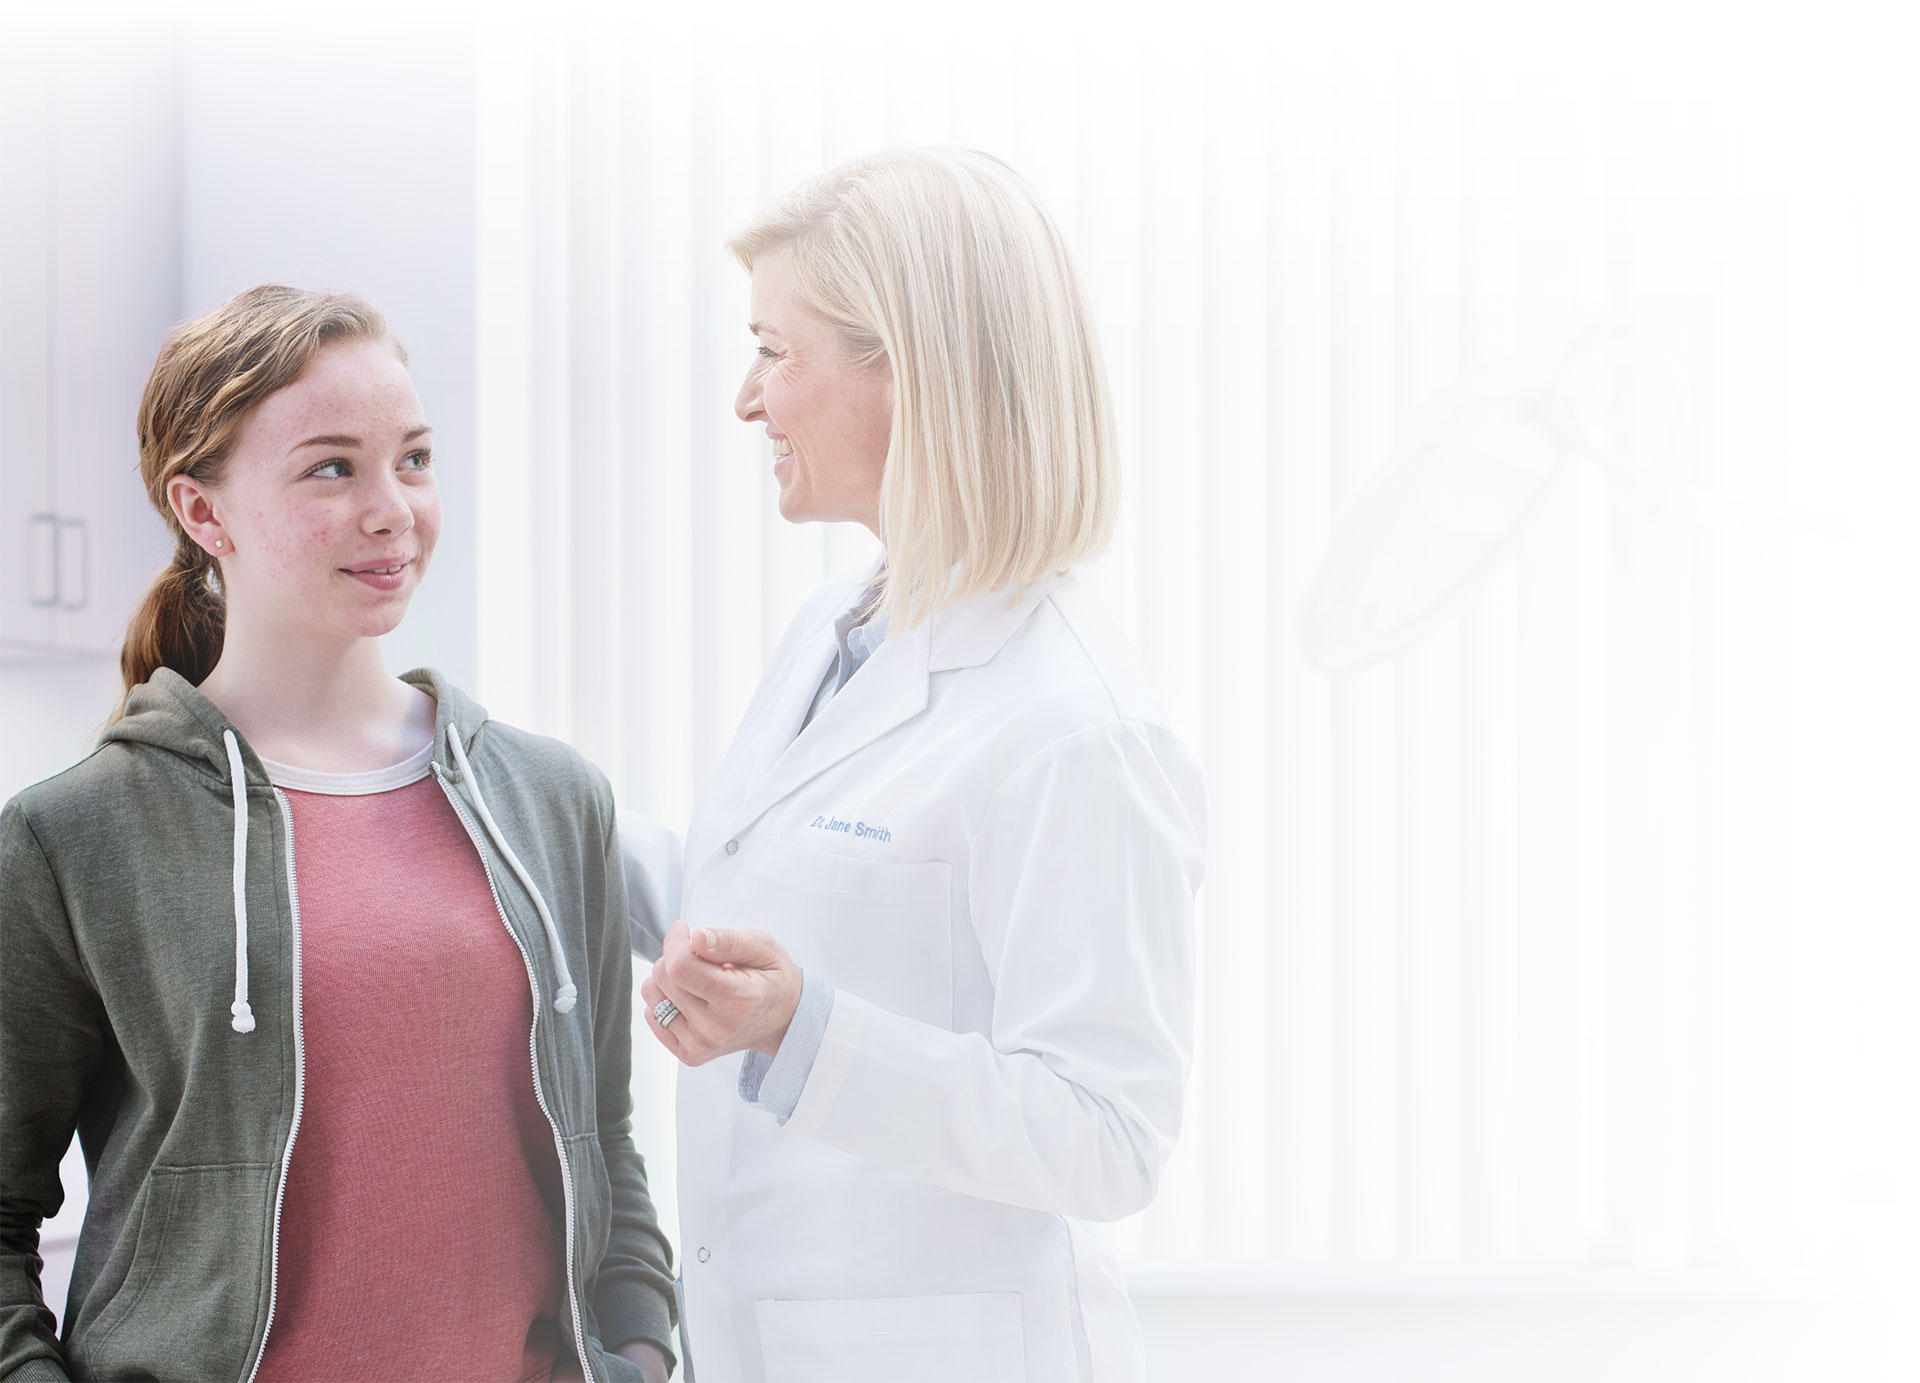 A young woman speaking with a doctor